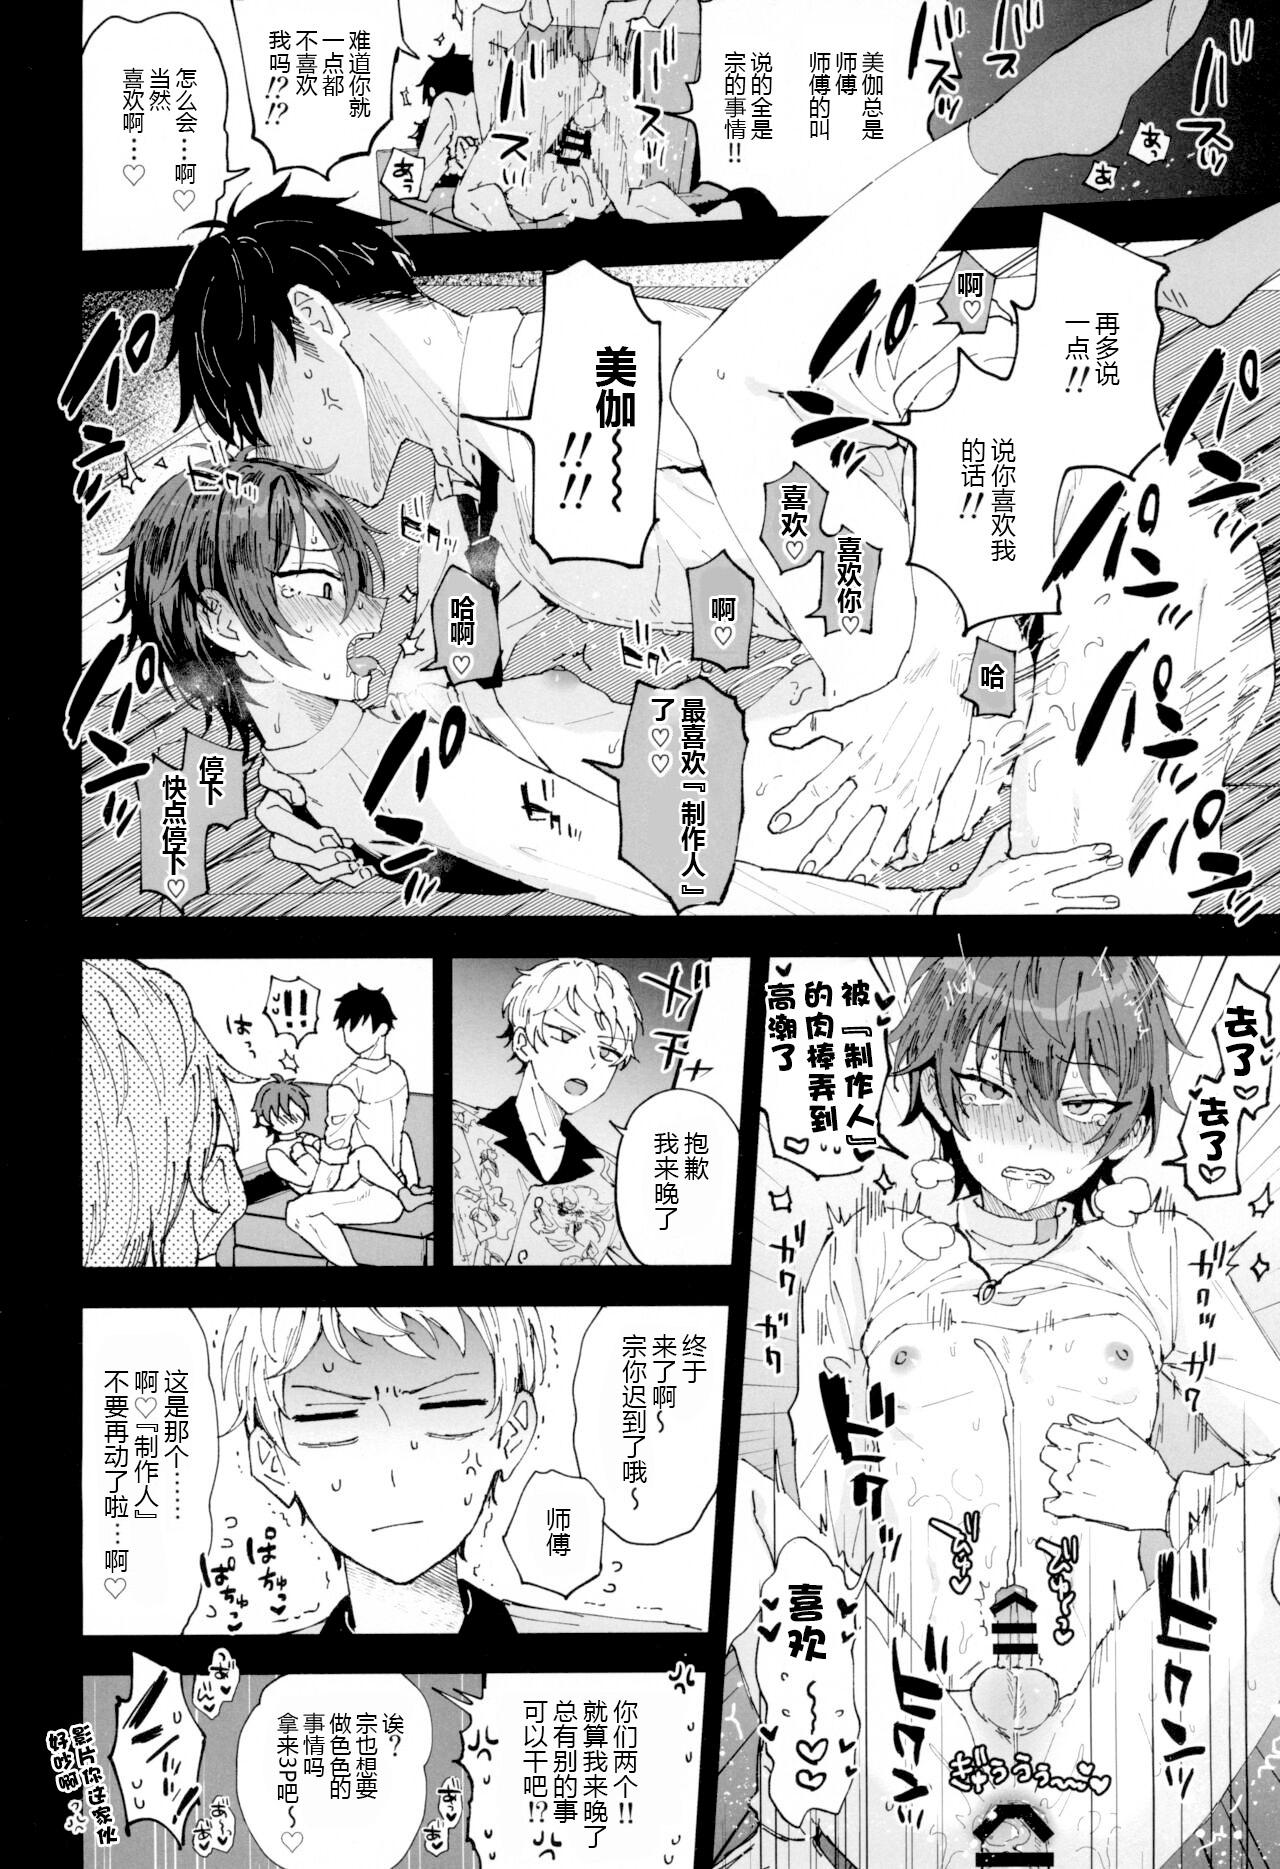 Homosexual Ore to kanojo to 1 week - Ensemble stars Gay Reality - Page 10